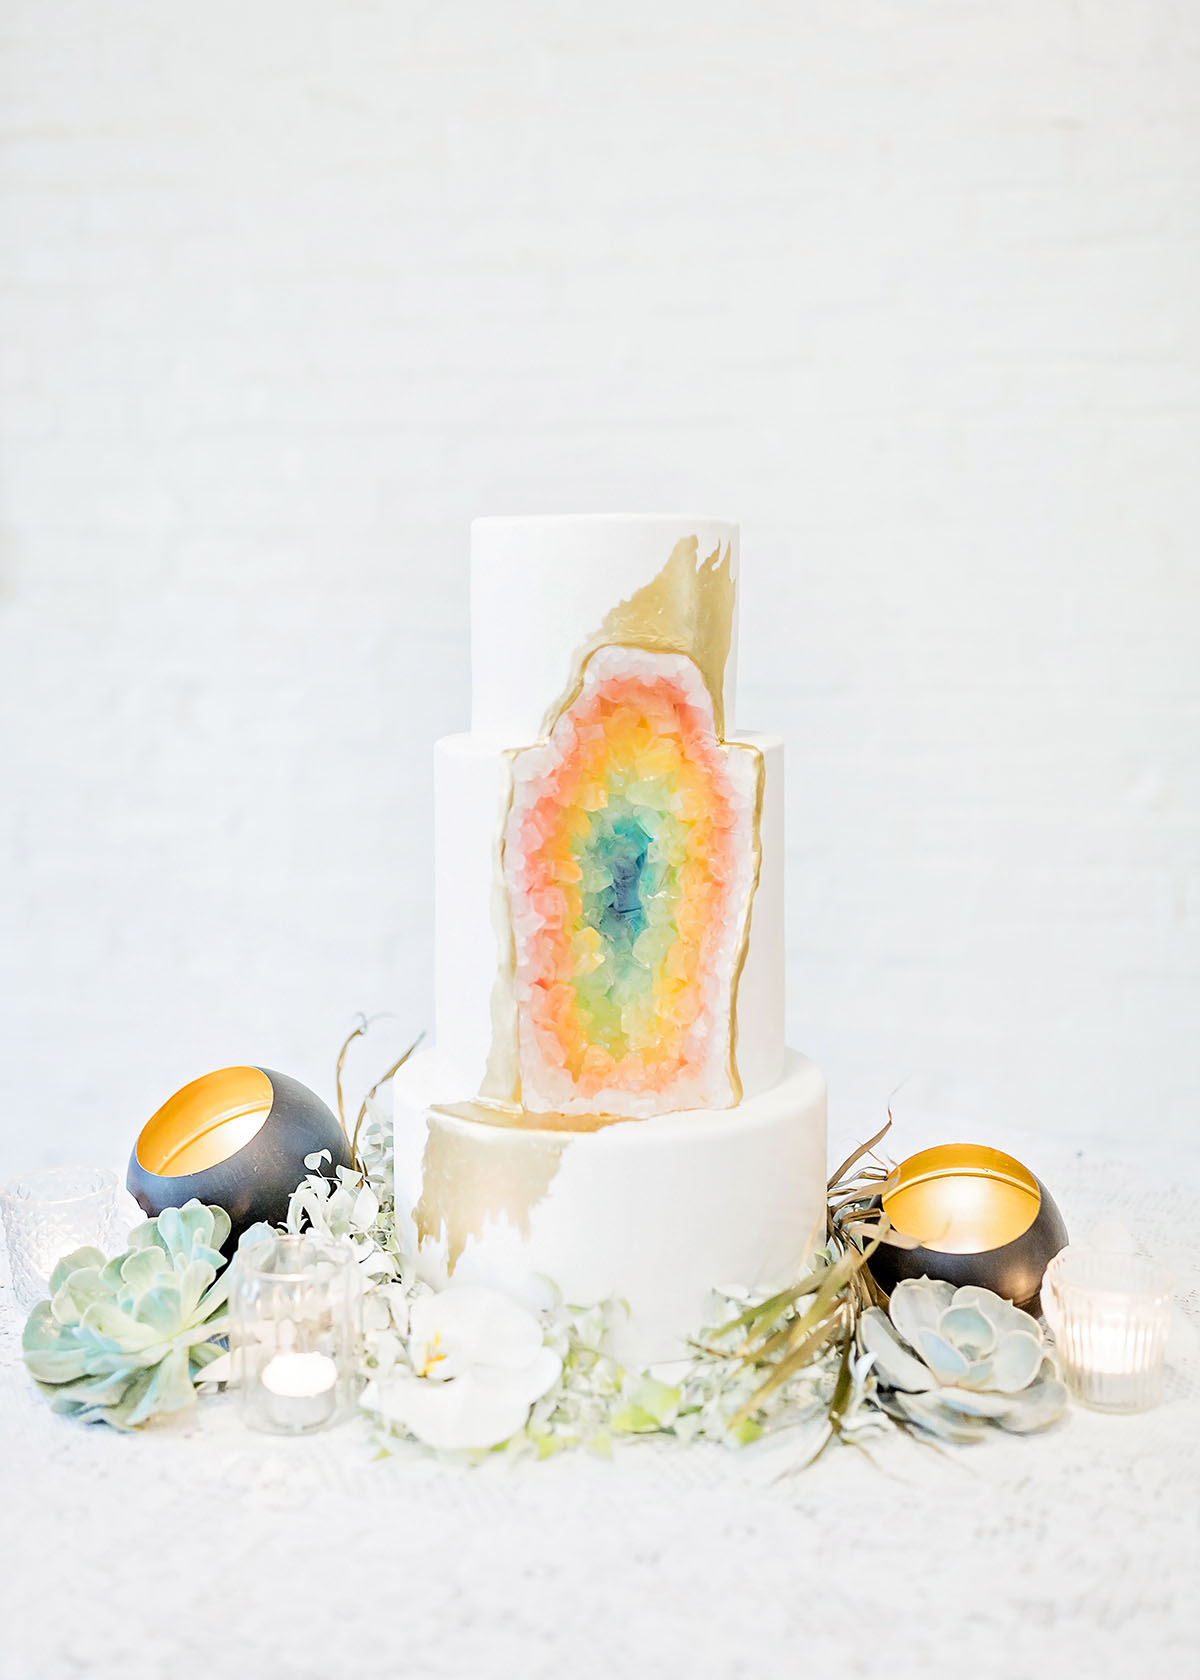 Rainbow double wedding inspiration two brides two grooms Pride colorful cake geode